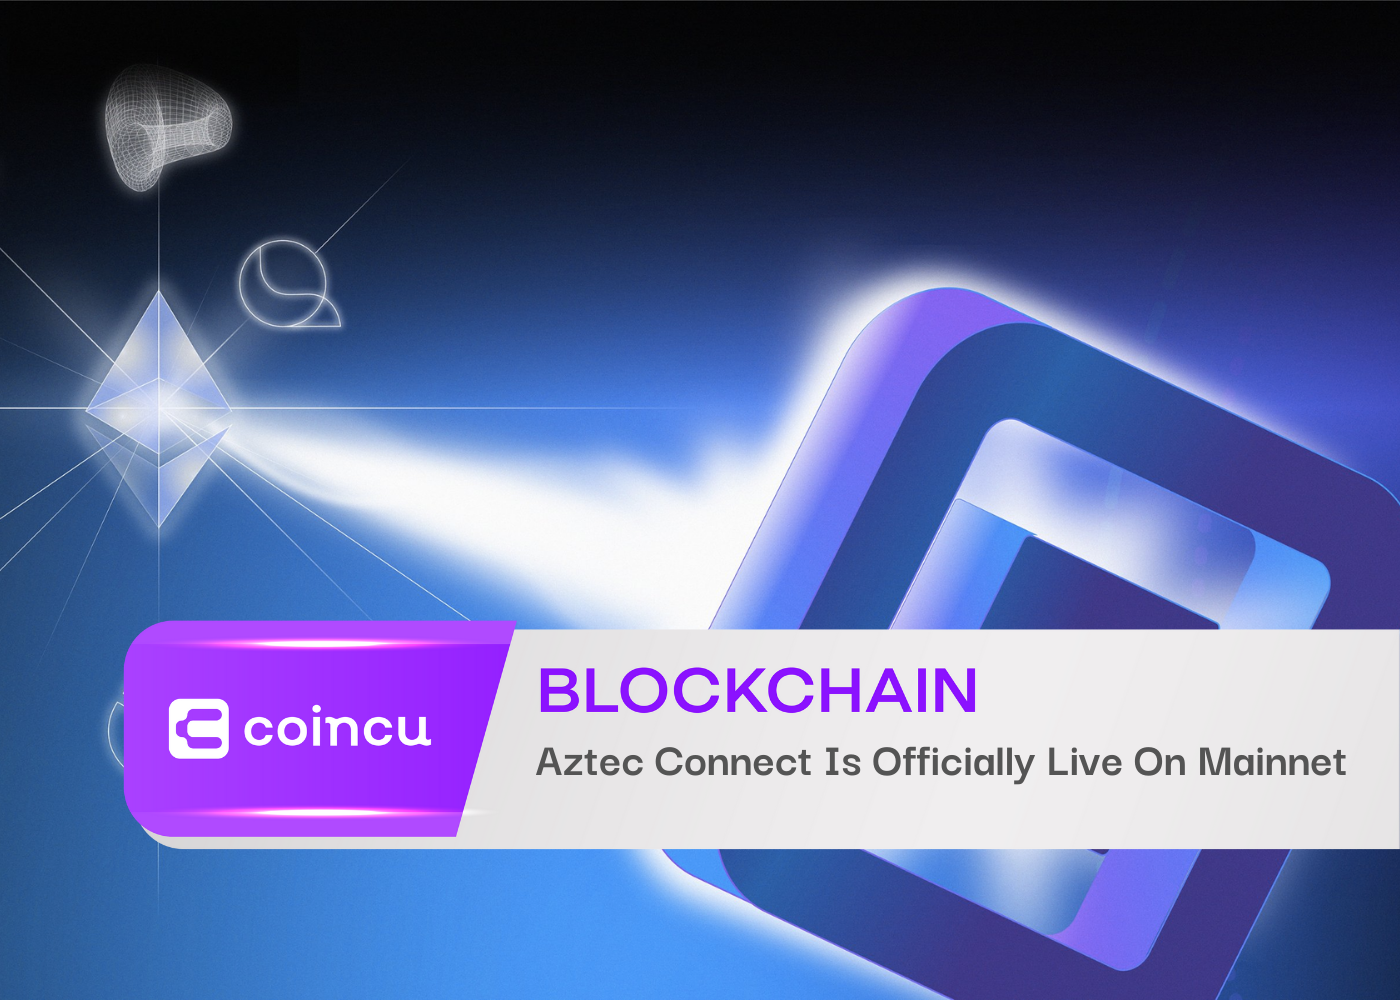 Aztec Connect Is Officially Live On Mainnet